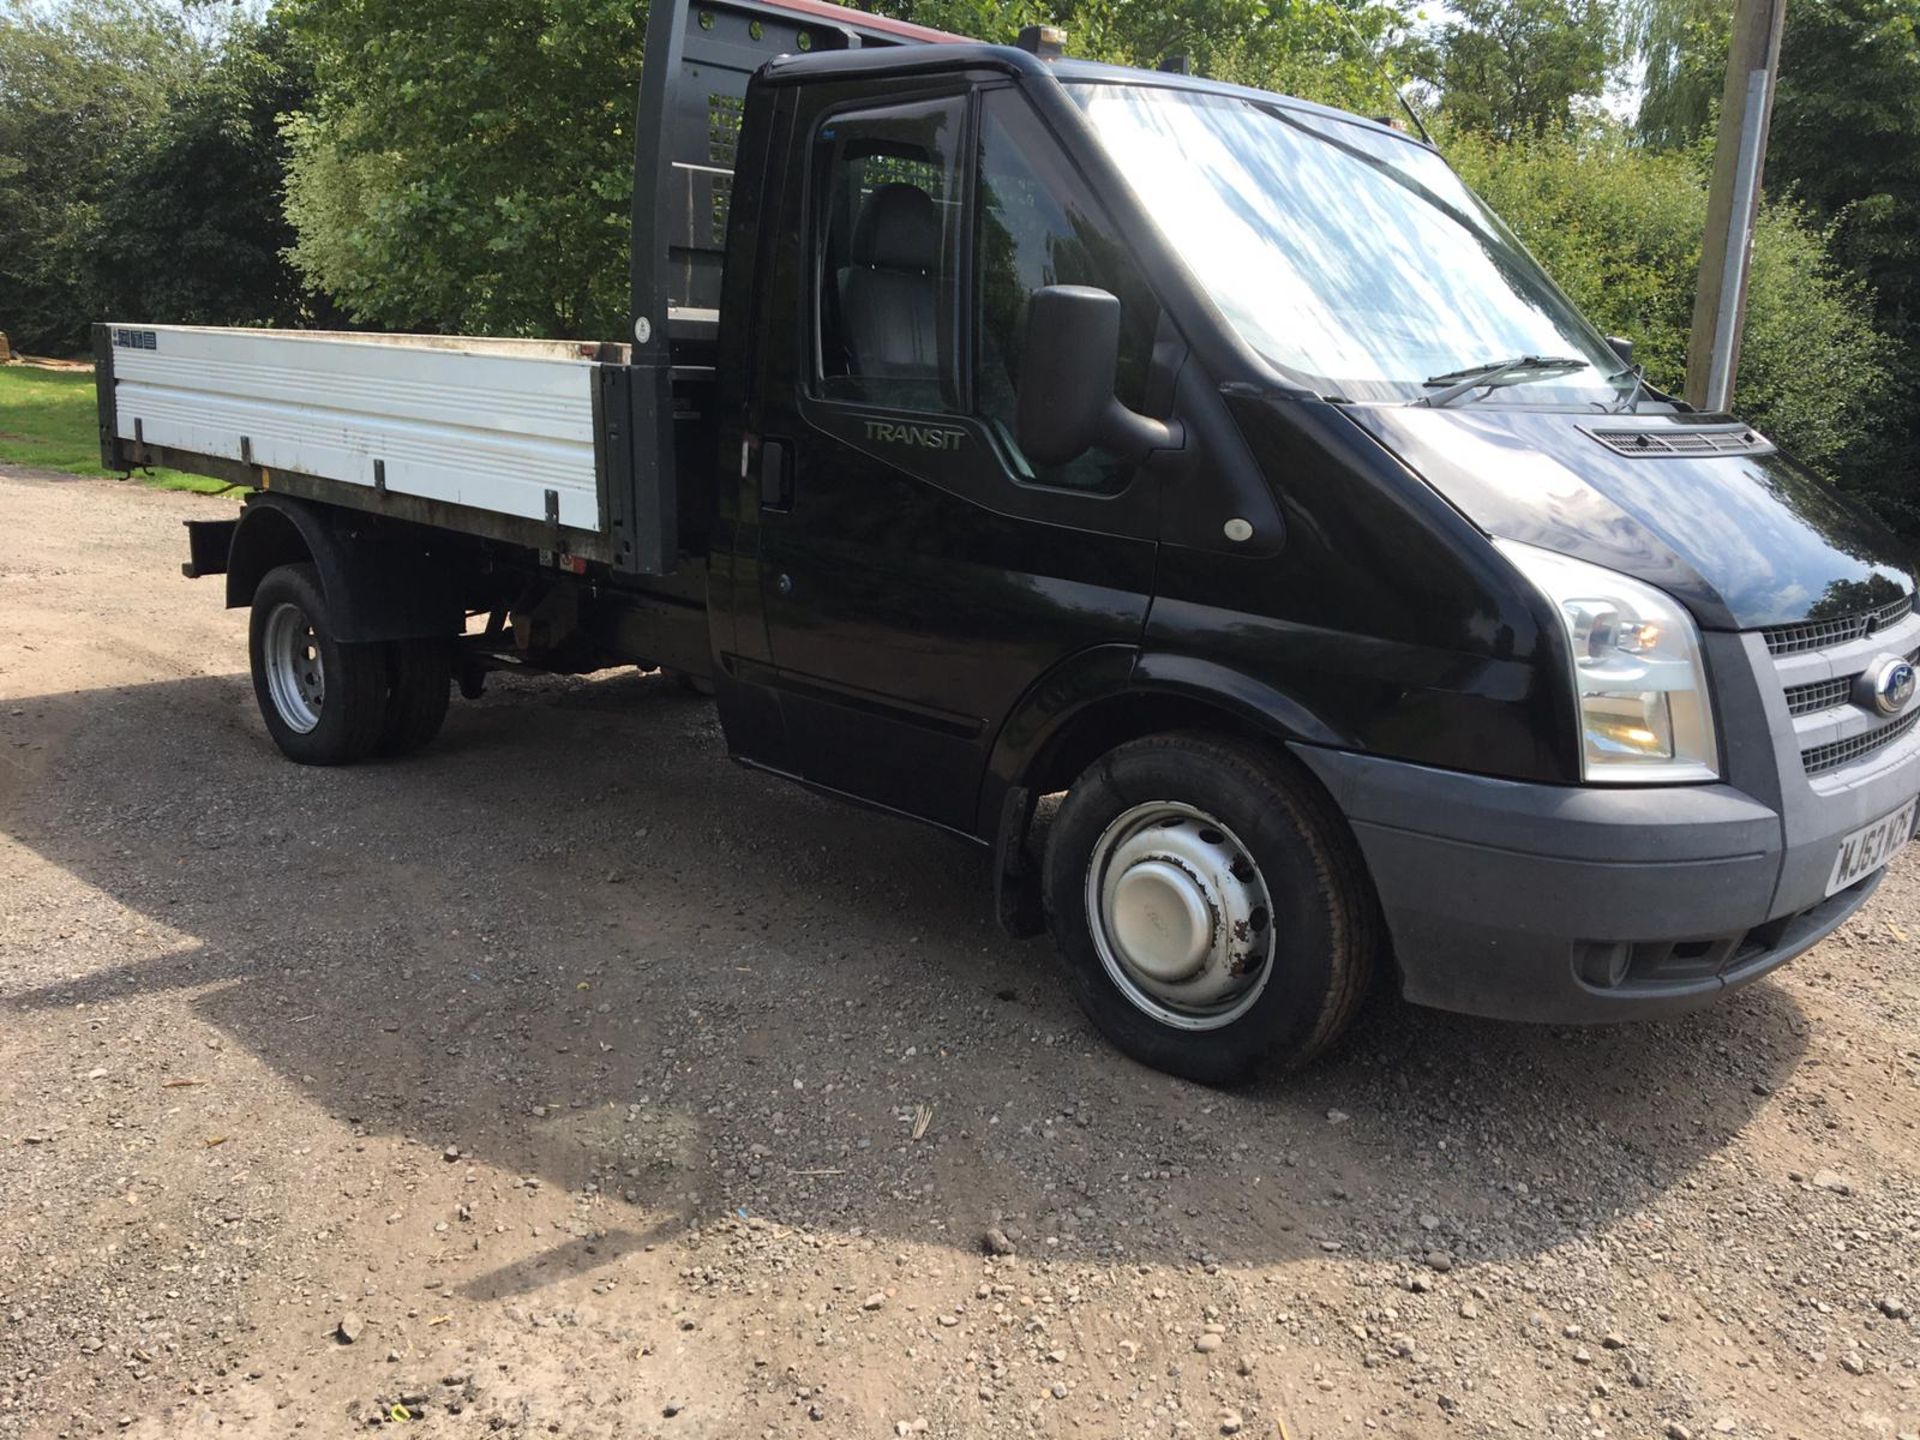 2013/63 REG FORD TRANSIT 100 T350 RWD 2.2 DIESEL DROPSIDE LORRY TIPPER, SHOWING 0 FORMER KEEPERS